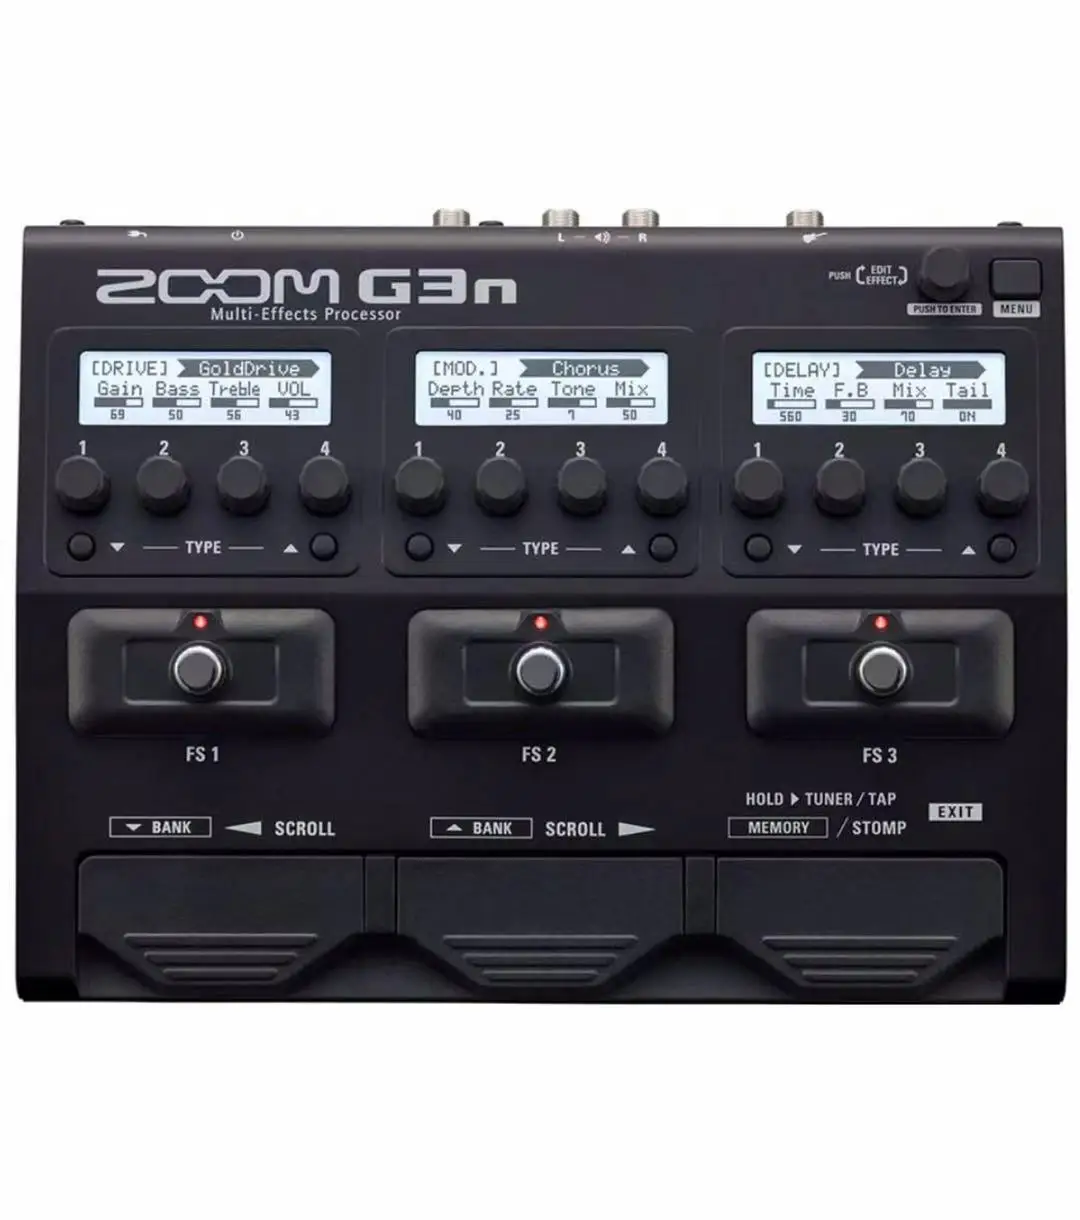 

Multi Guitar effects pedal for electric guitarra Stringed Instruments Parts & Accessories zoom G3N